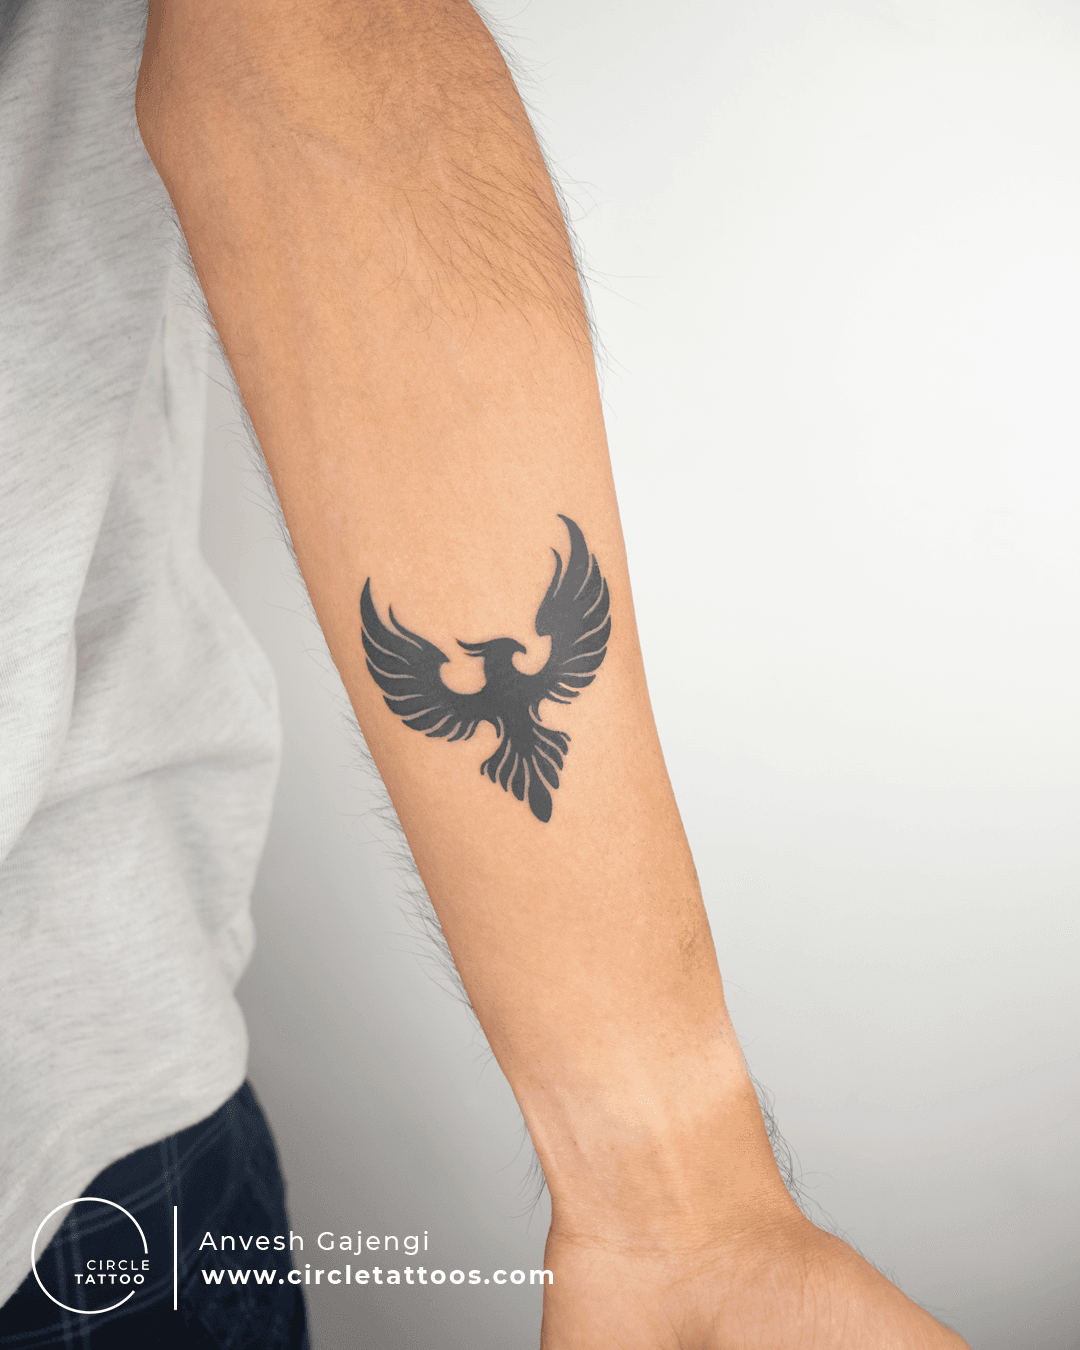 125 Band Tattoos You Can Rock In 2022  Wild Tattoo Art